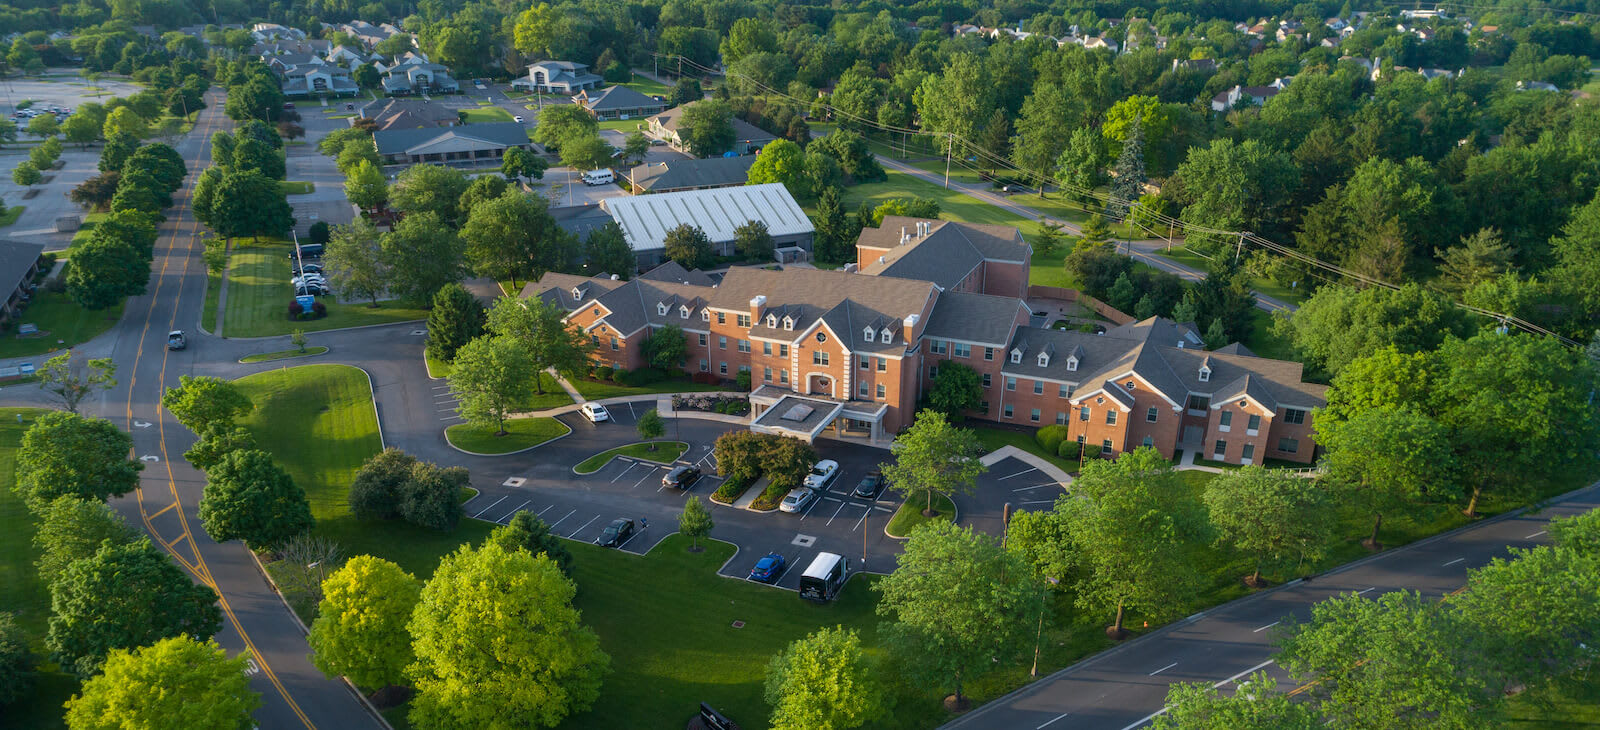 Harmony Trace aerial view of community